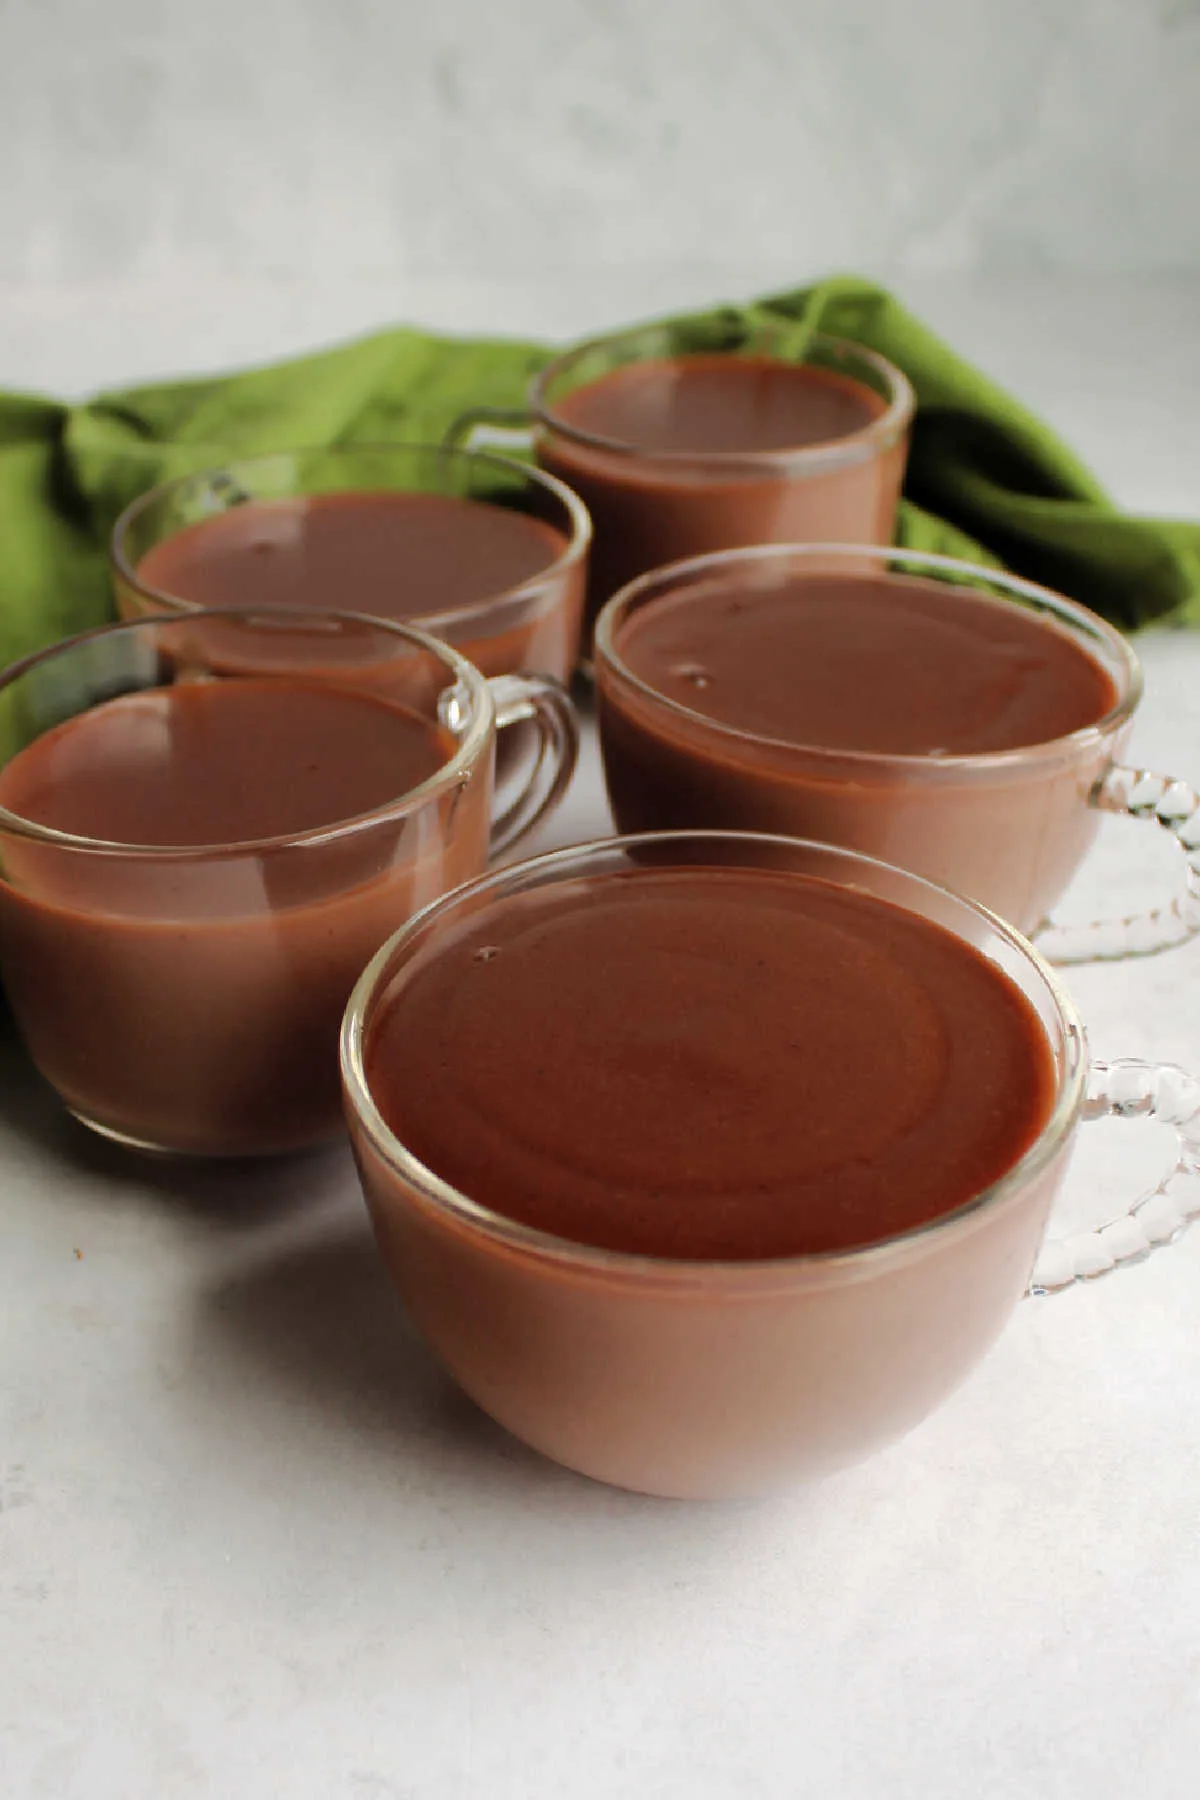 Glass mugs filled with hot chocolate pudding.